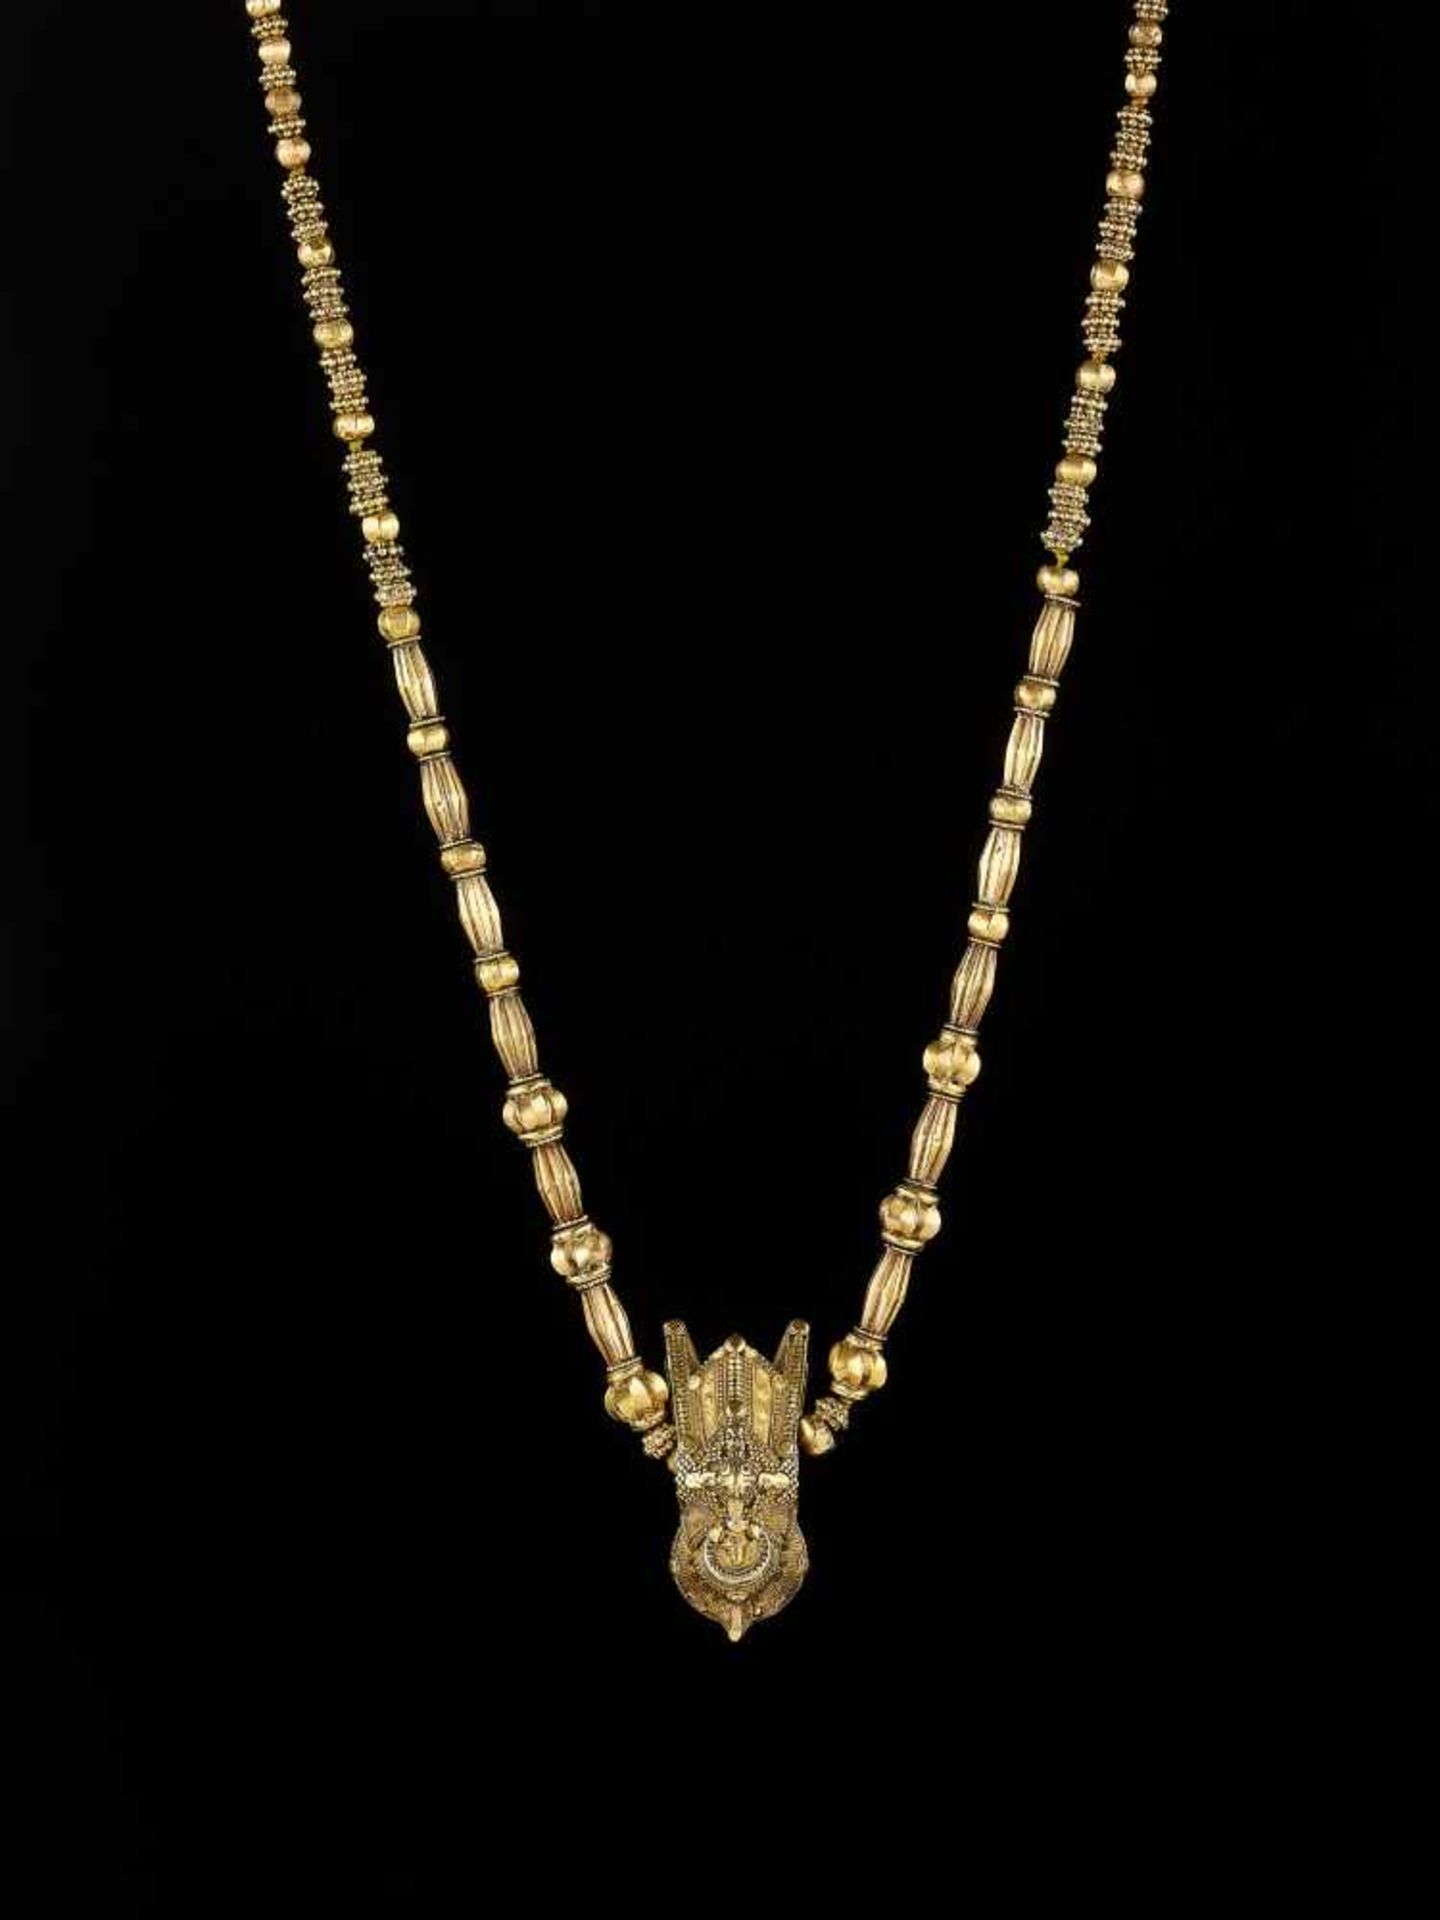 A TODA ‘BULLS HEAD’ GOLD NECKLACE Southern India, mid-19th to early 20th century. The central